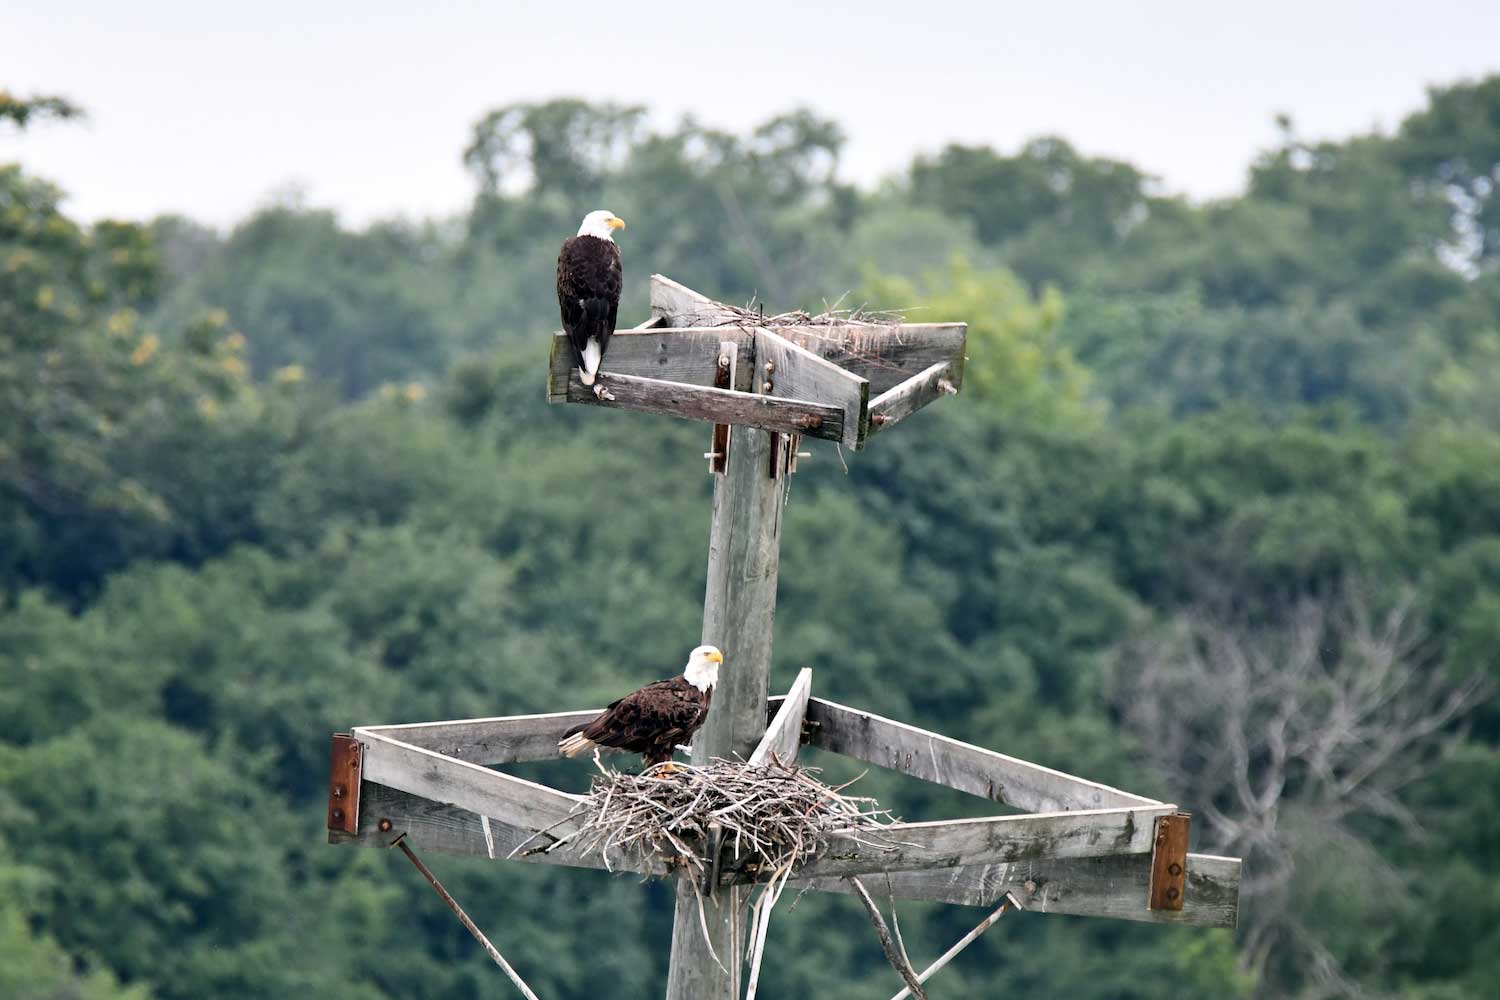 Two bald eagles perched on a nesting platform.